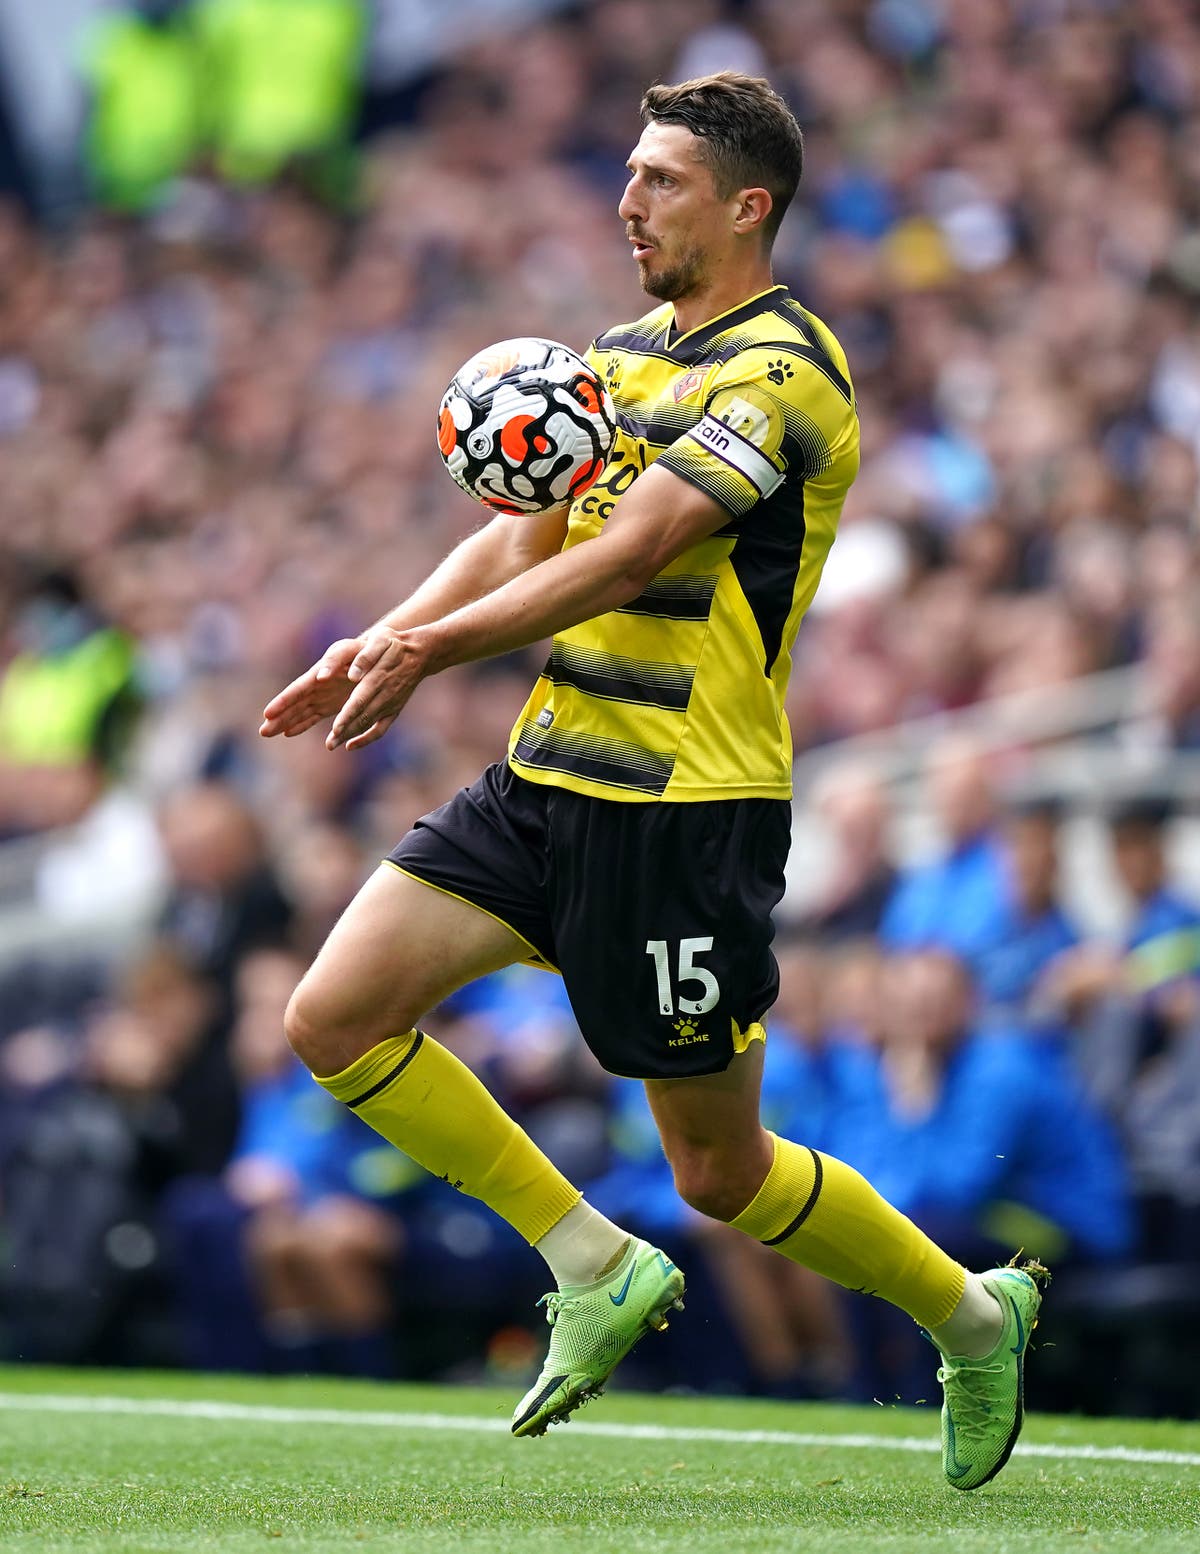 Craig Cathcart thinks Watford’s hire-and-fire policy for managers works for club